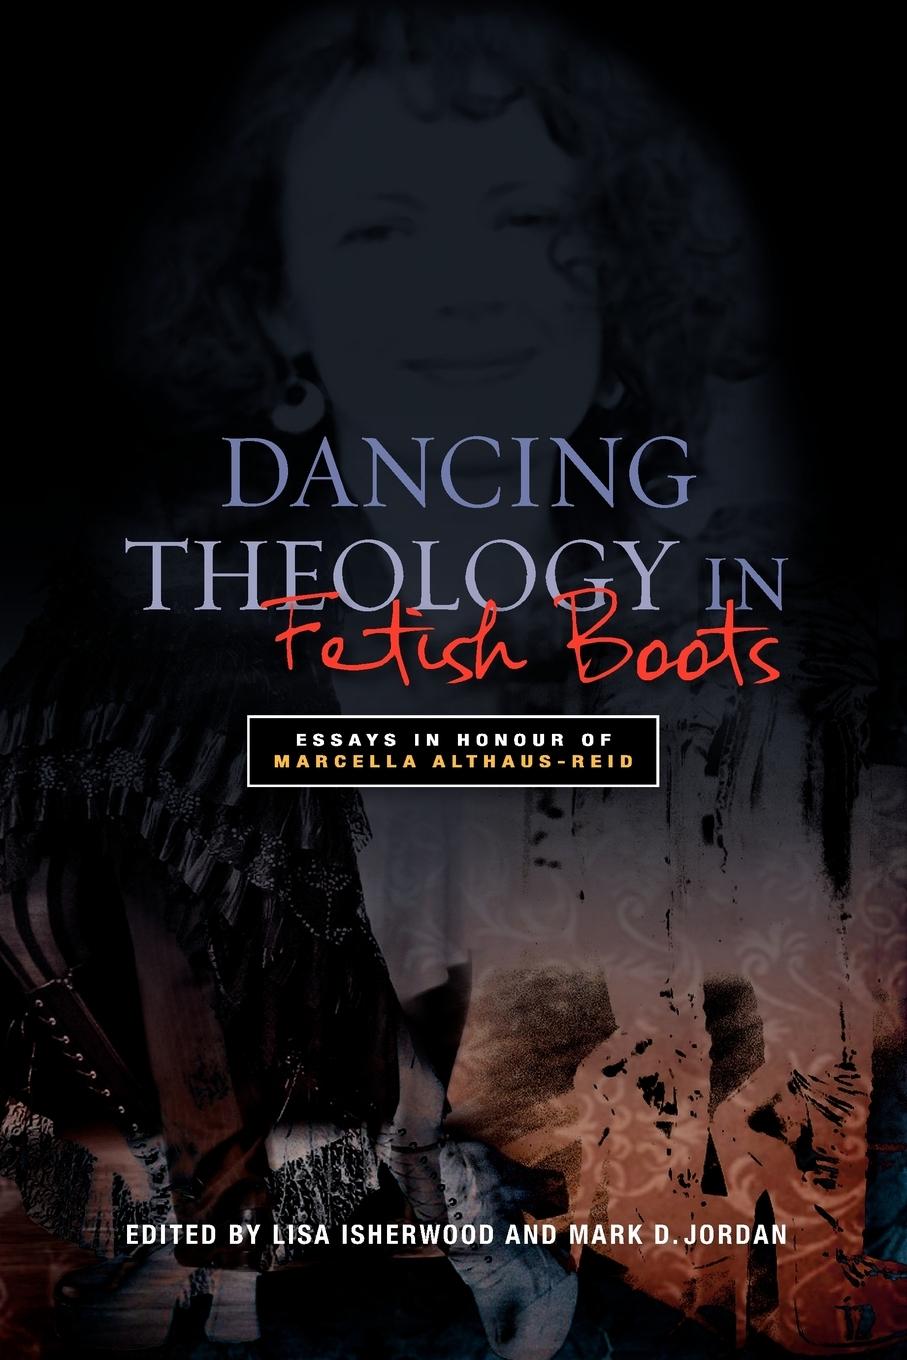 Dancing Theology in Fetish Boots